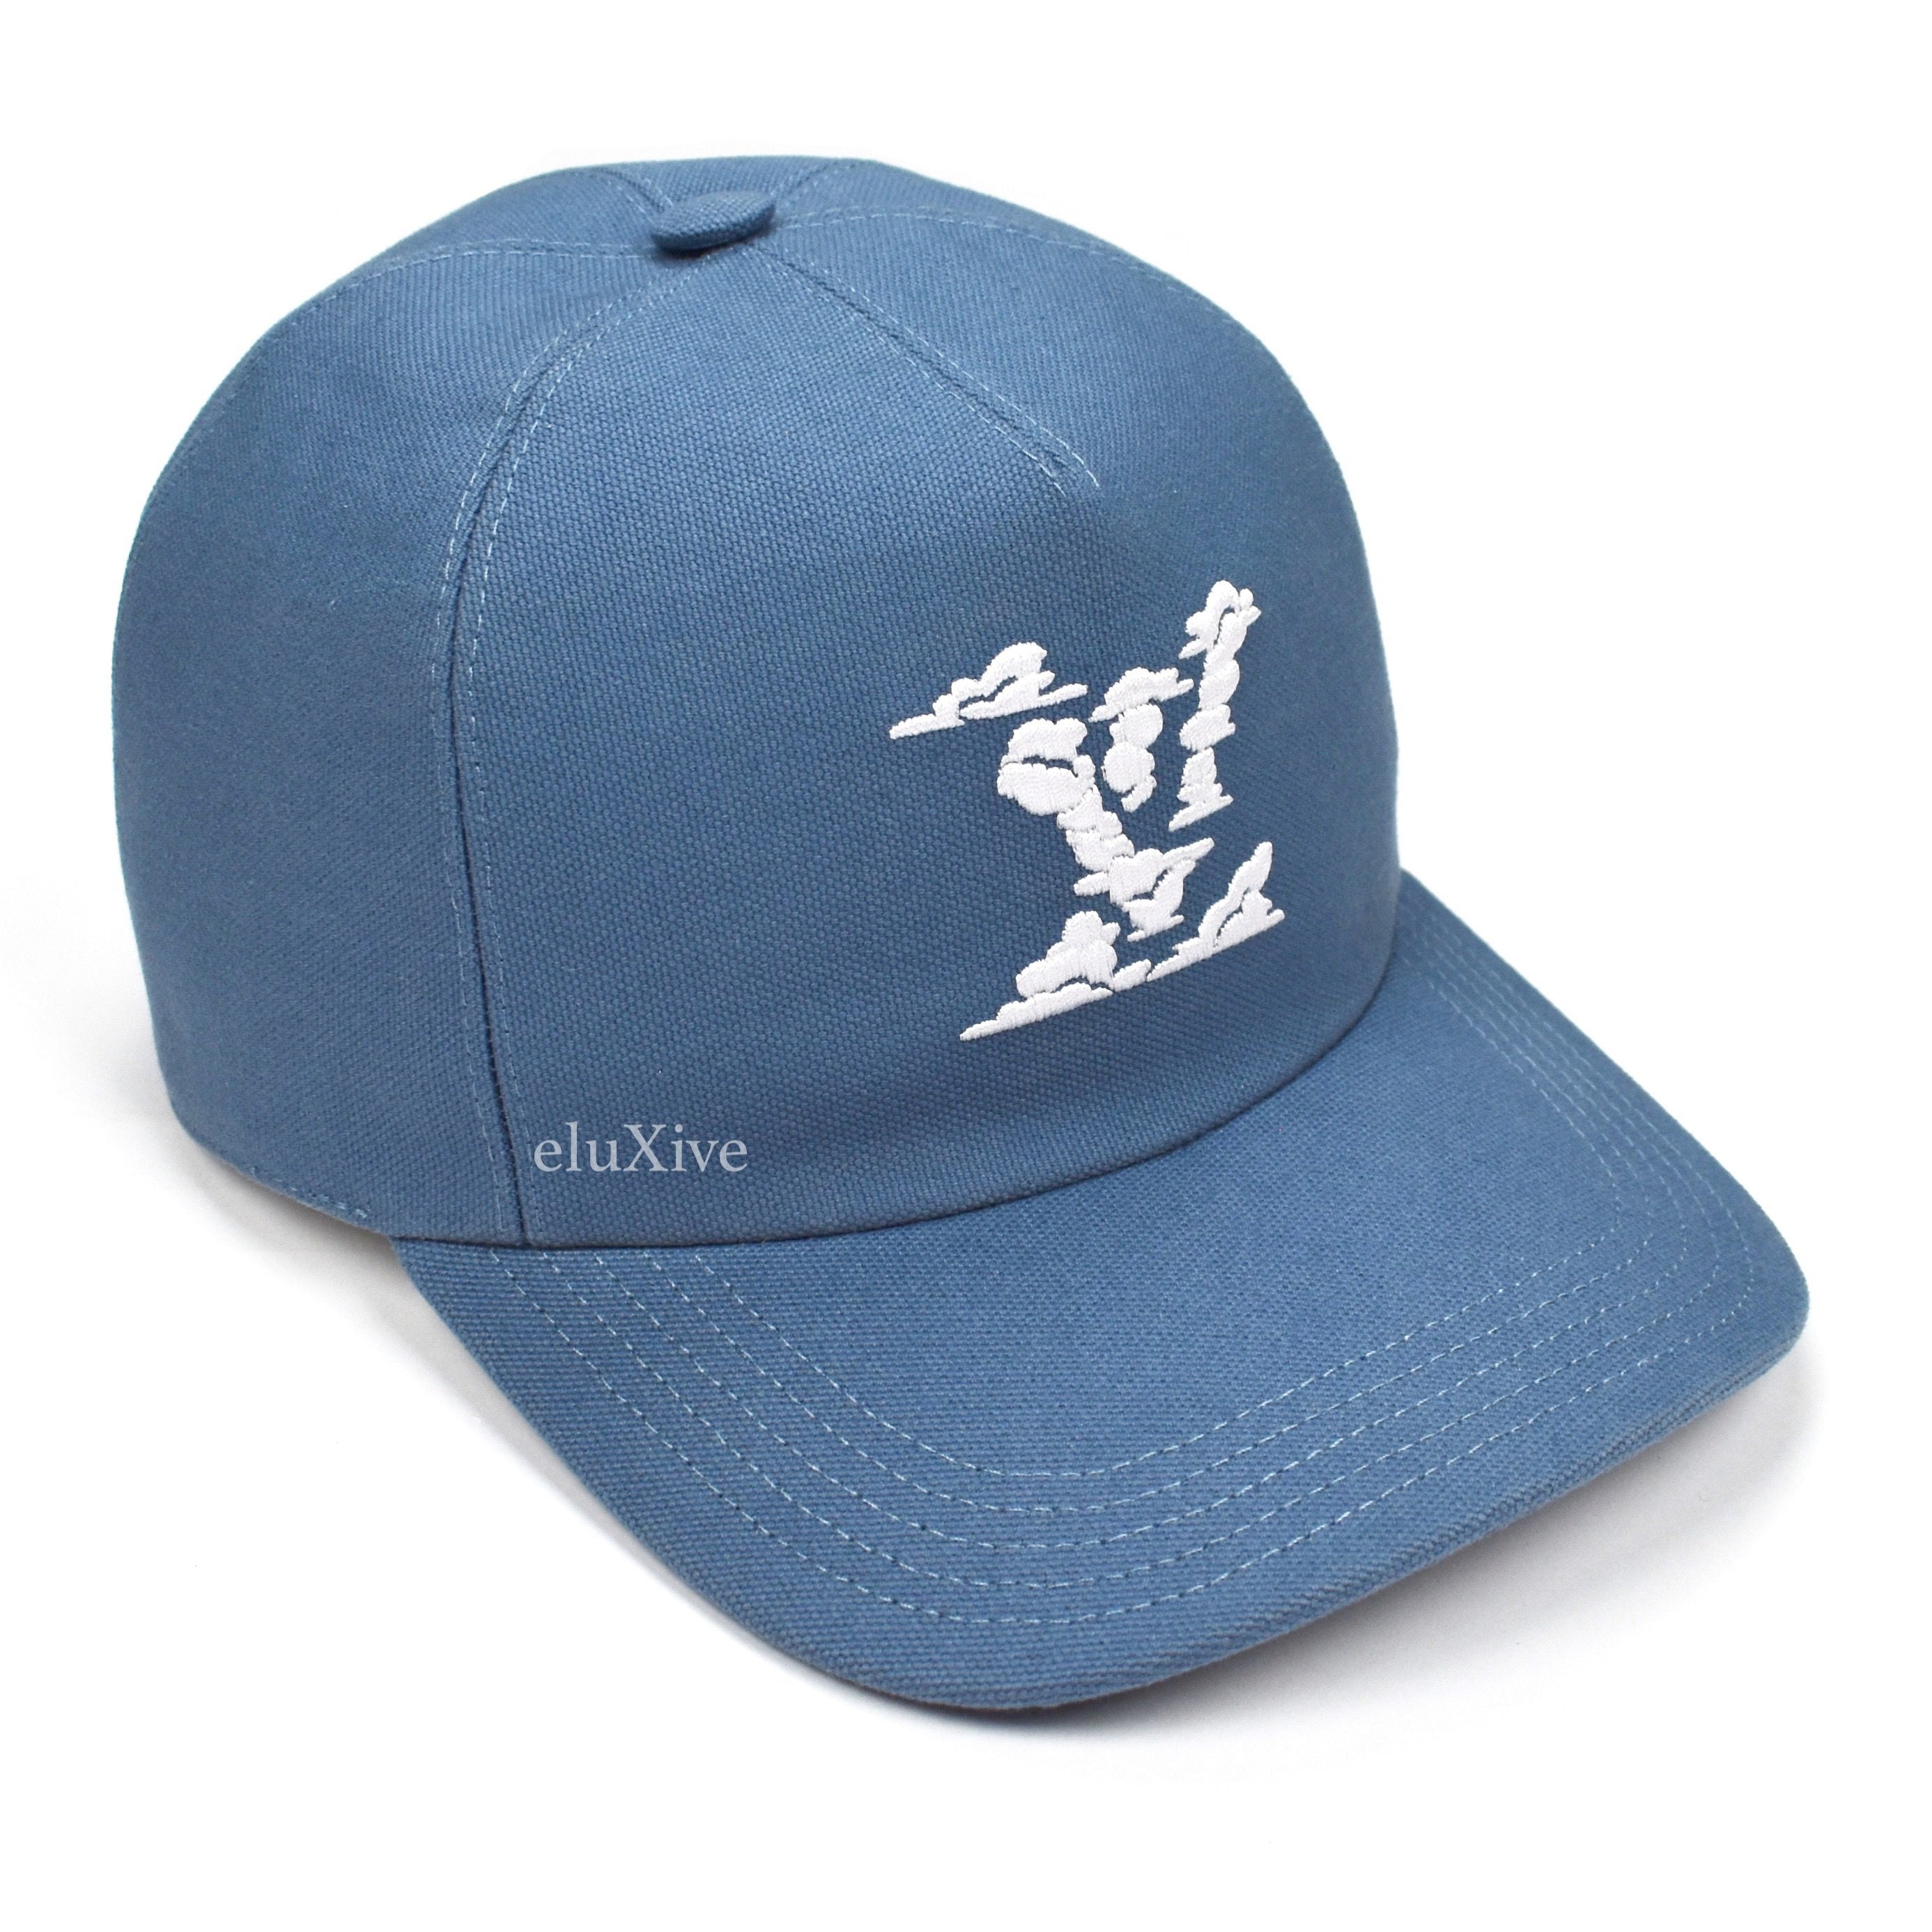 Louis Vuitton - LV Cloud Logo Embroidered Hat – eluXive